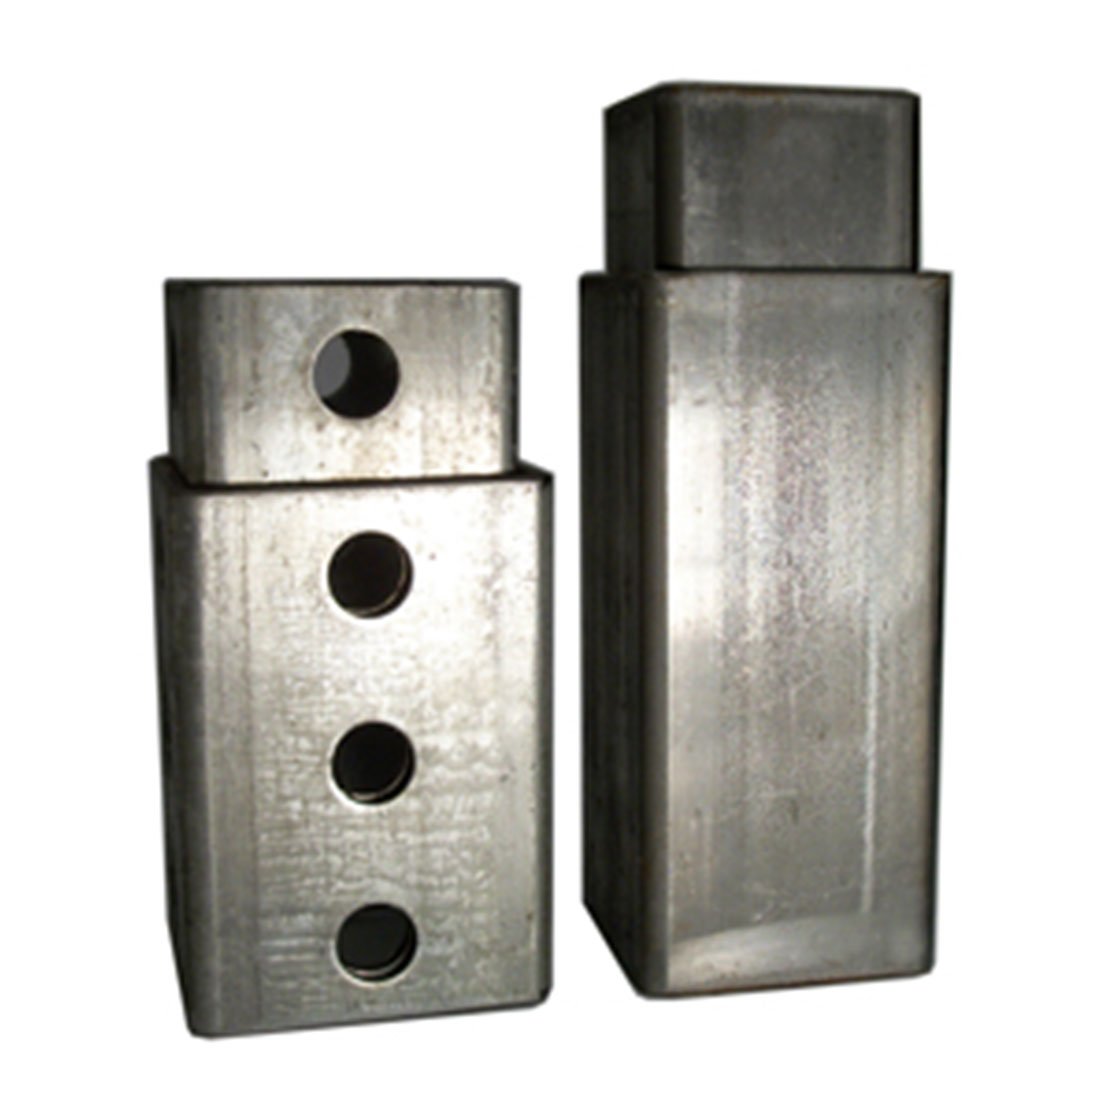 Telespar Tube: telescopic square tube with or without holes, in plain carbon steel or pre-galvanized finish